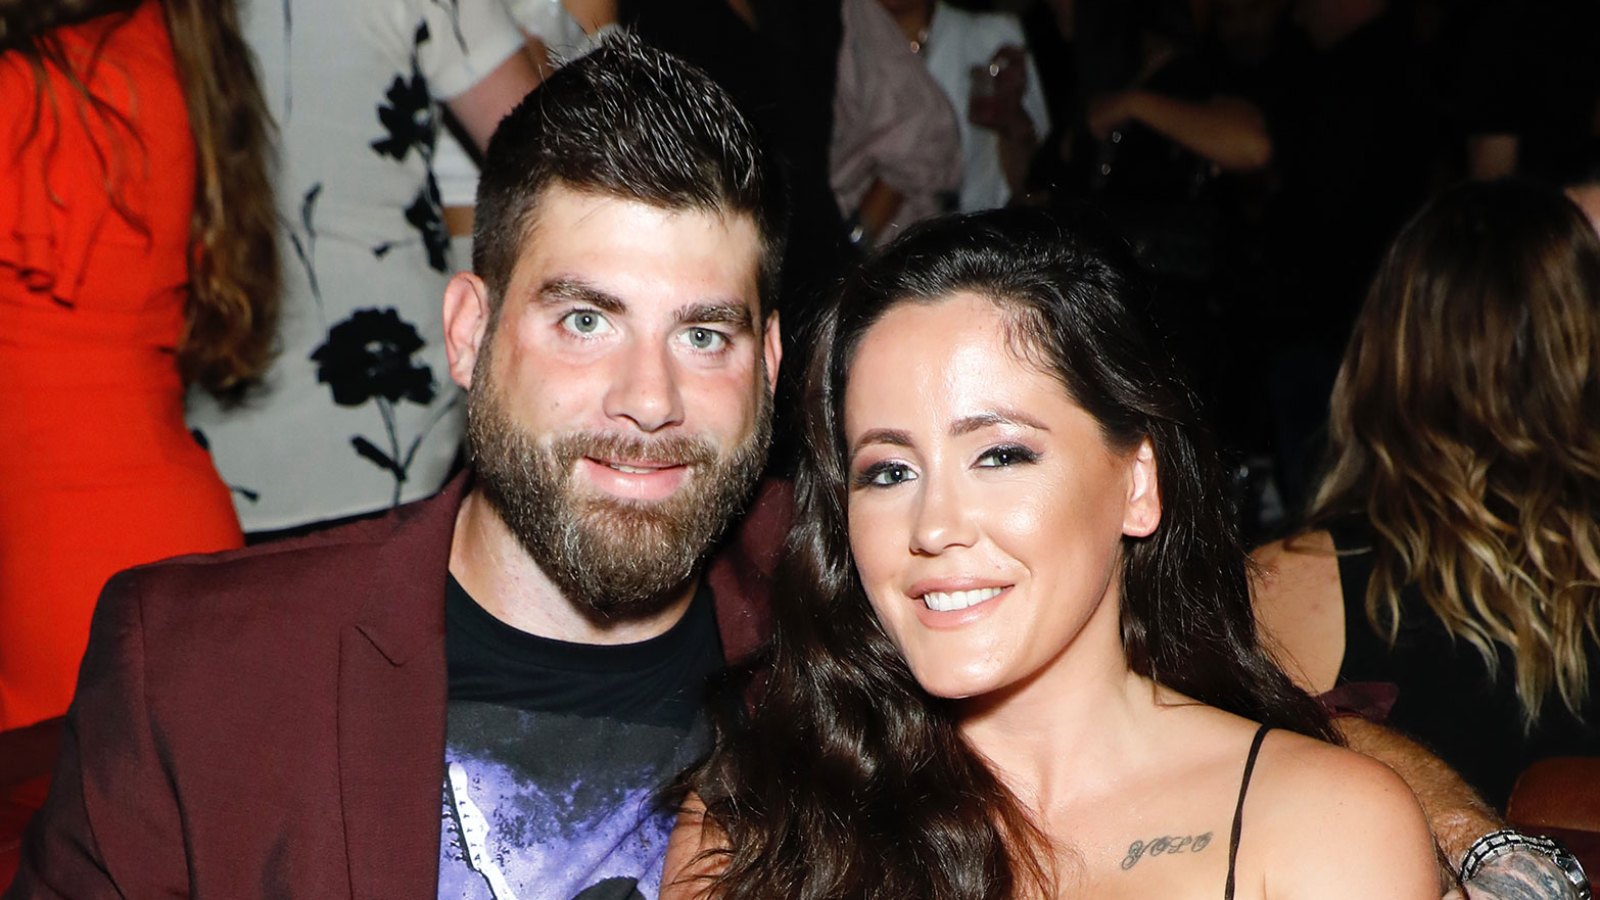 Jenelle Evans Reveals the Reason She Turned Down New 'Teen Mom' Offer, Which Did Not Include Husband David Eason